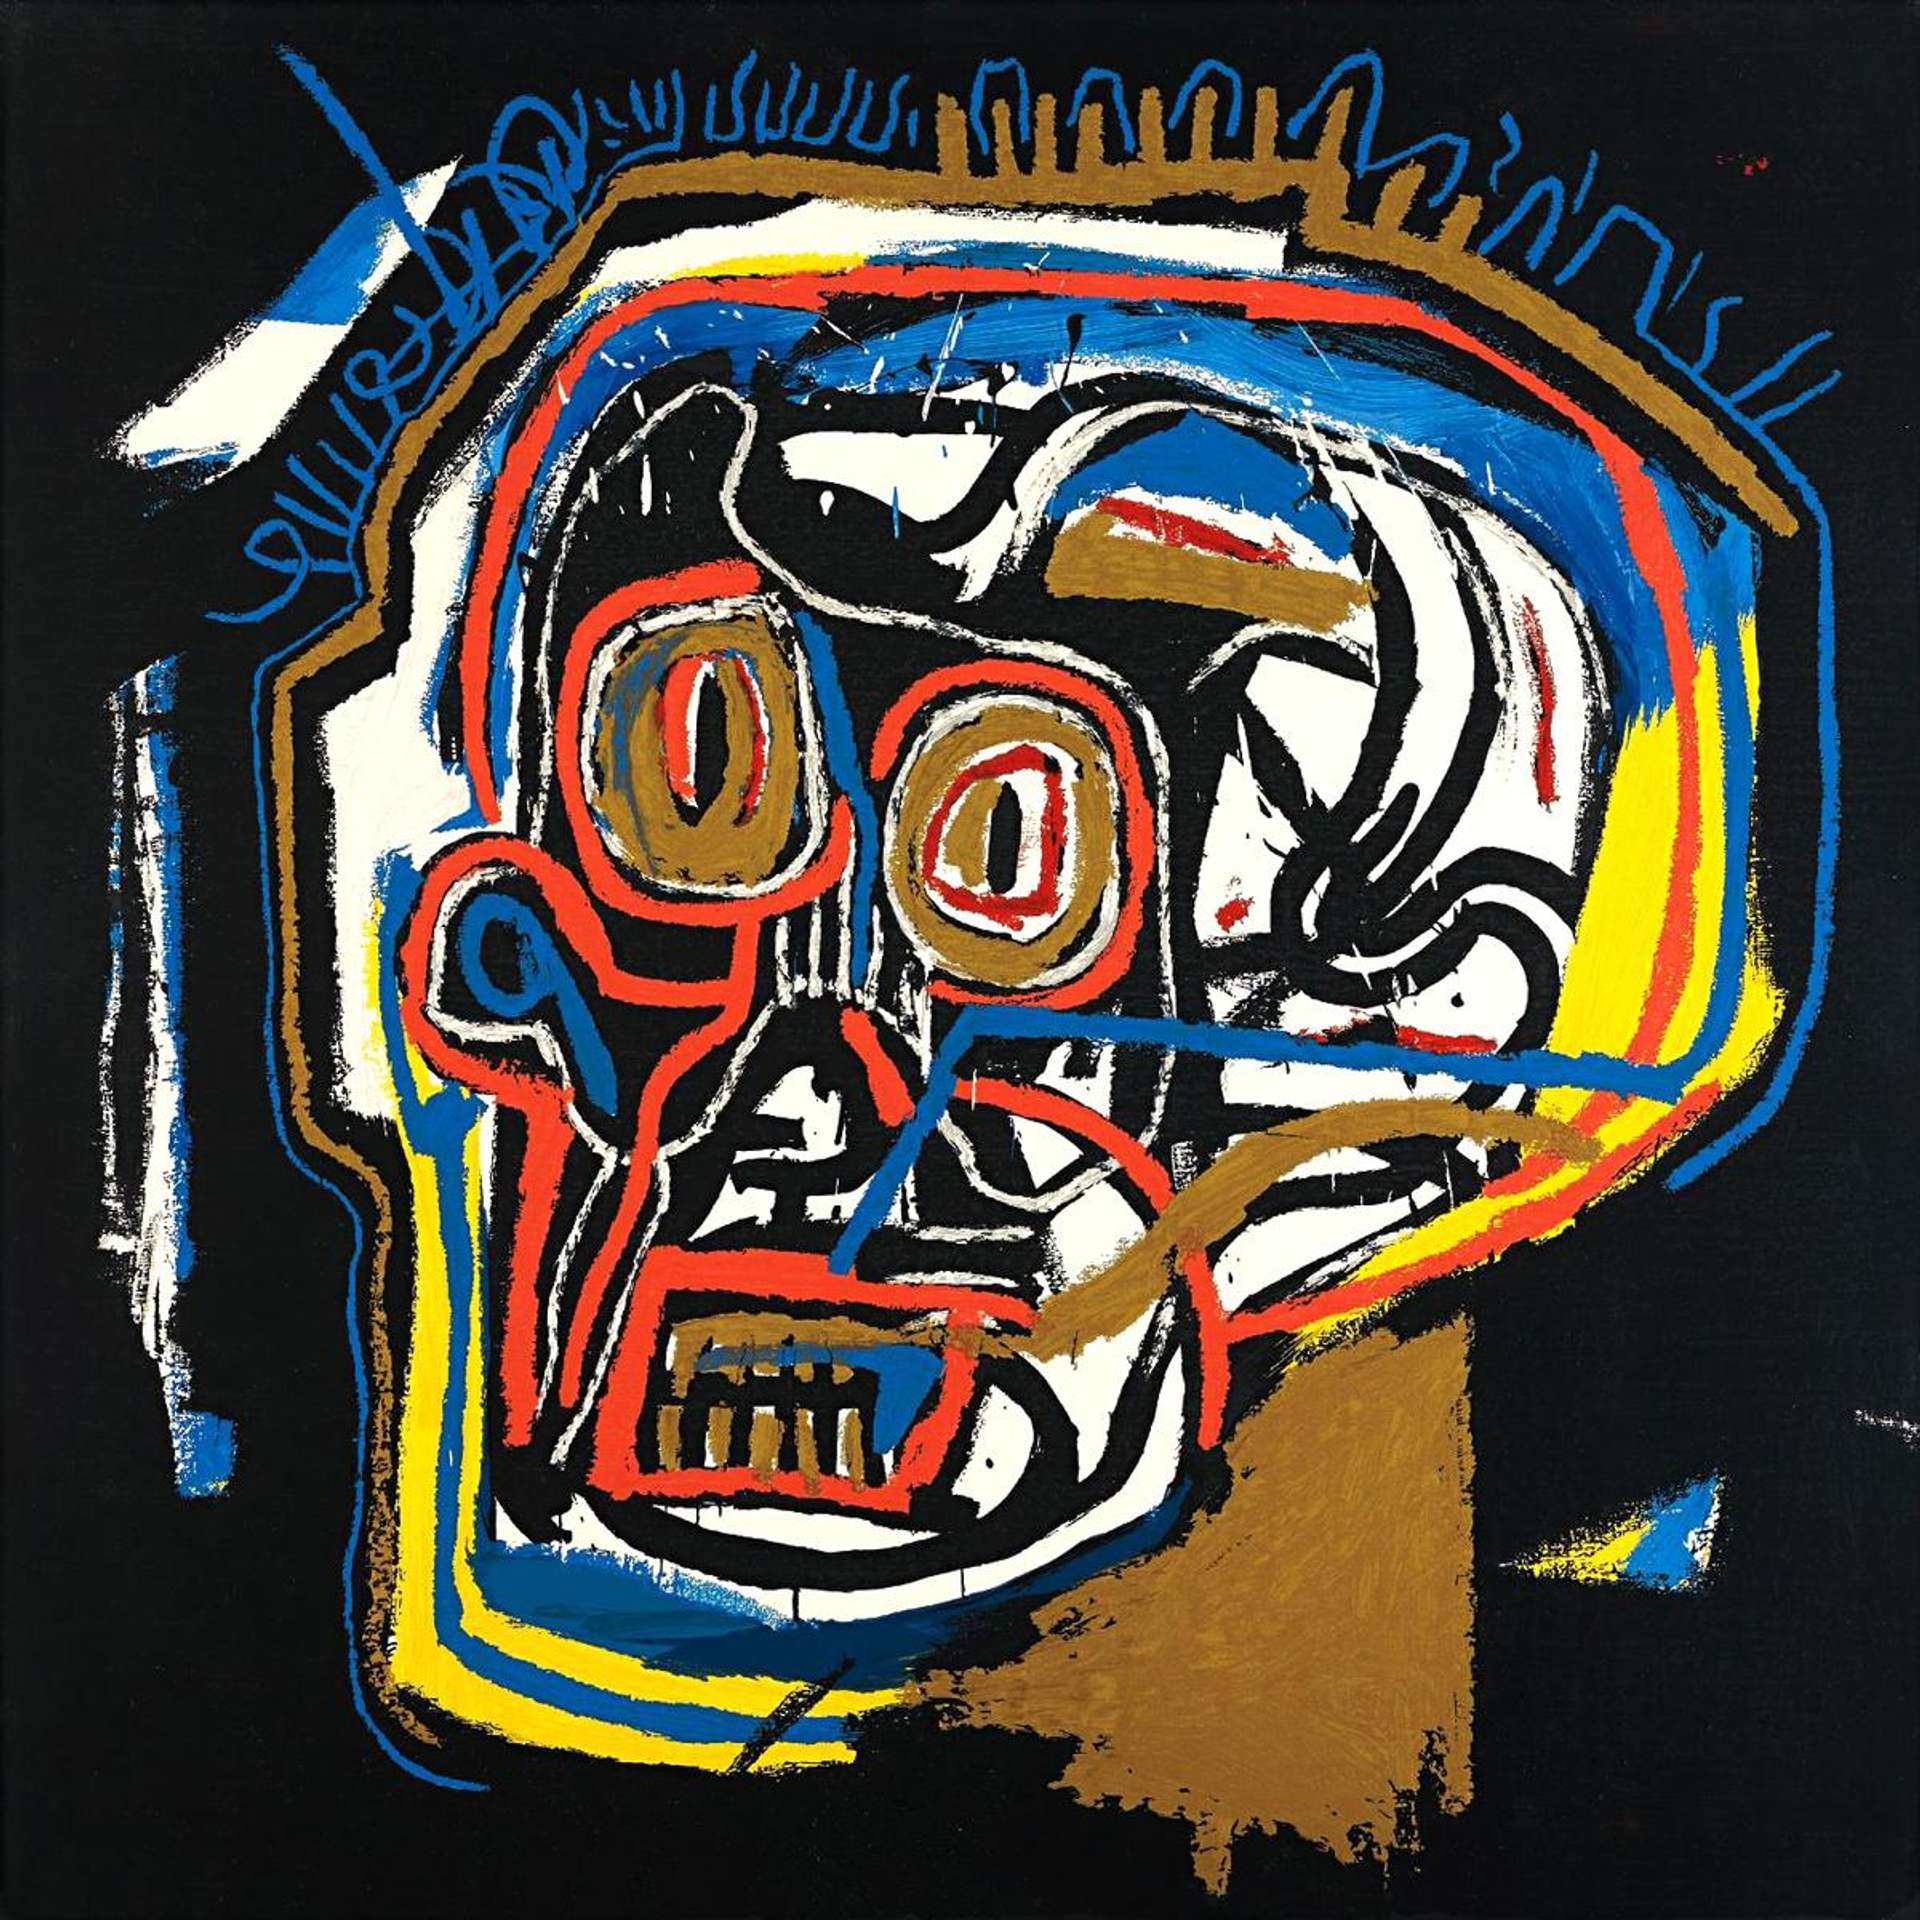 Graffiti style head by Jean-Michel Basquiat, formed of multicoloured strokes on a black background.